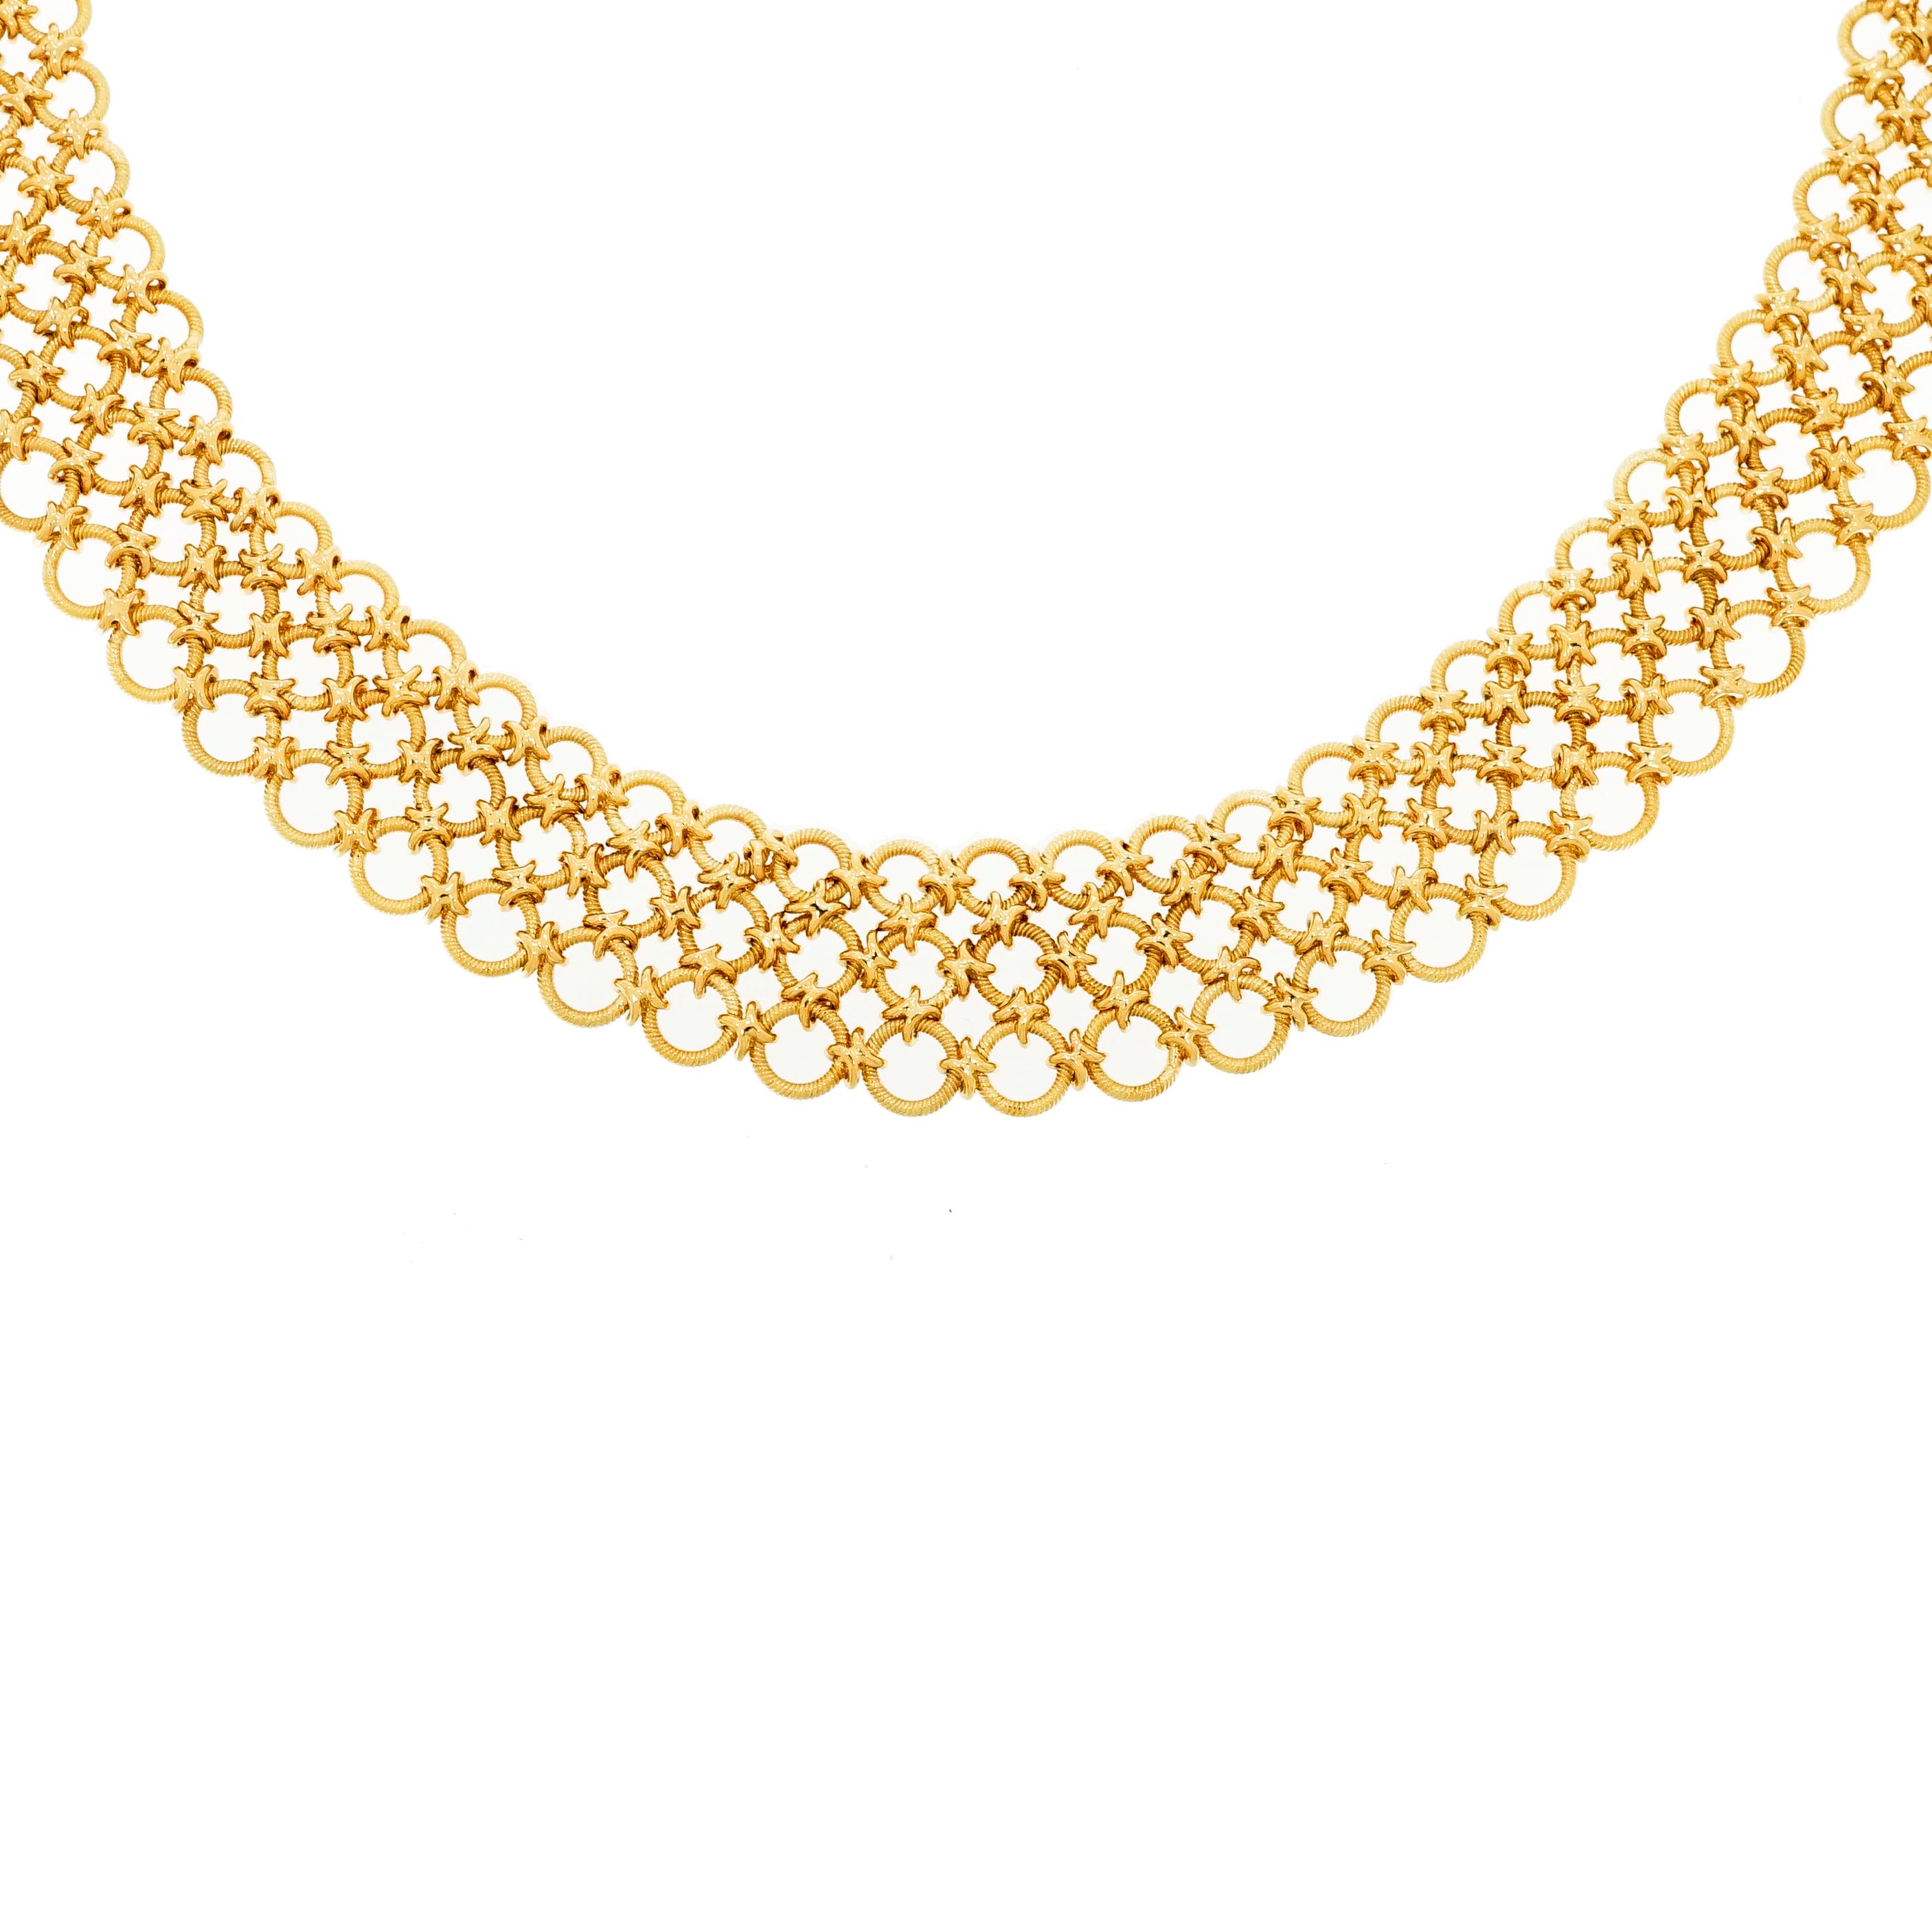 This exquisite necklace is intricately designed and handcrafted in 18k Yellow Gold.
Is extremely flexible and soft to the touch. 
The necklace has a gross weight of 74.95 grams and measure 17 inches in length.
Very versatile!!
